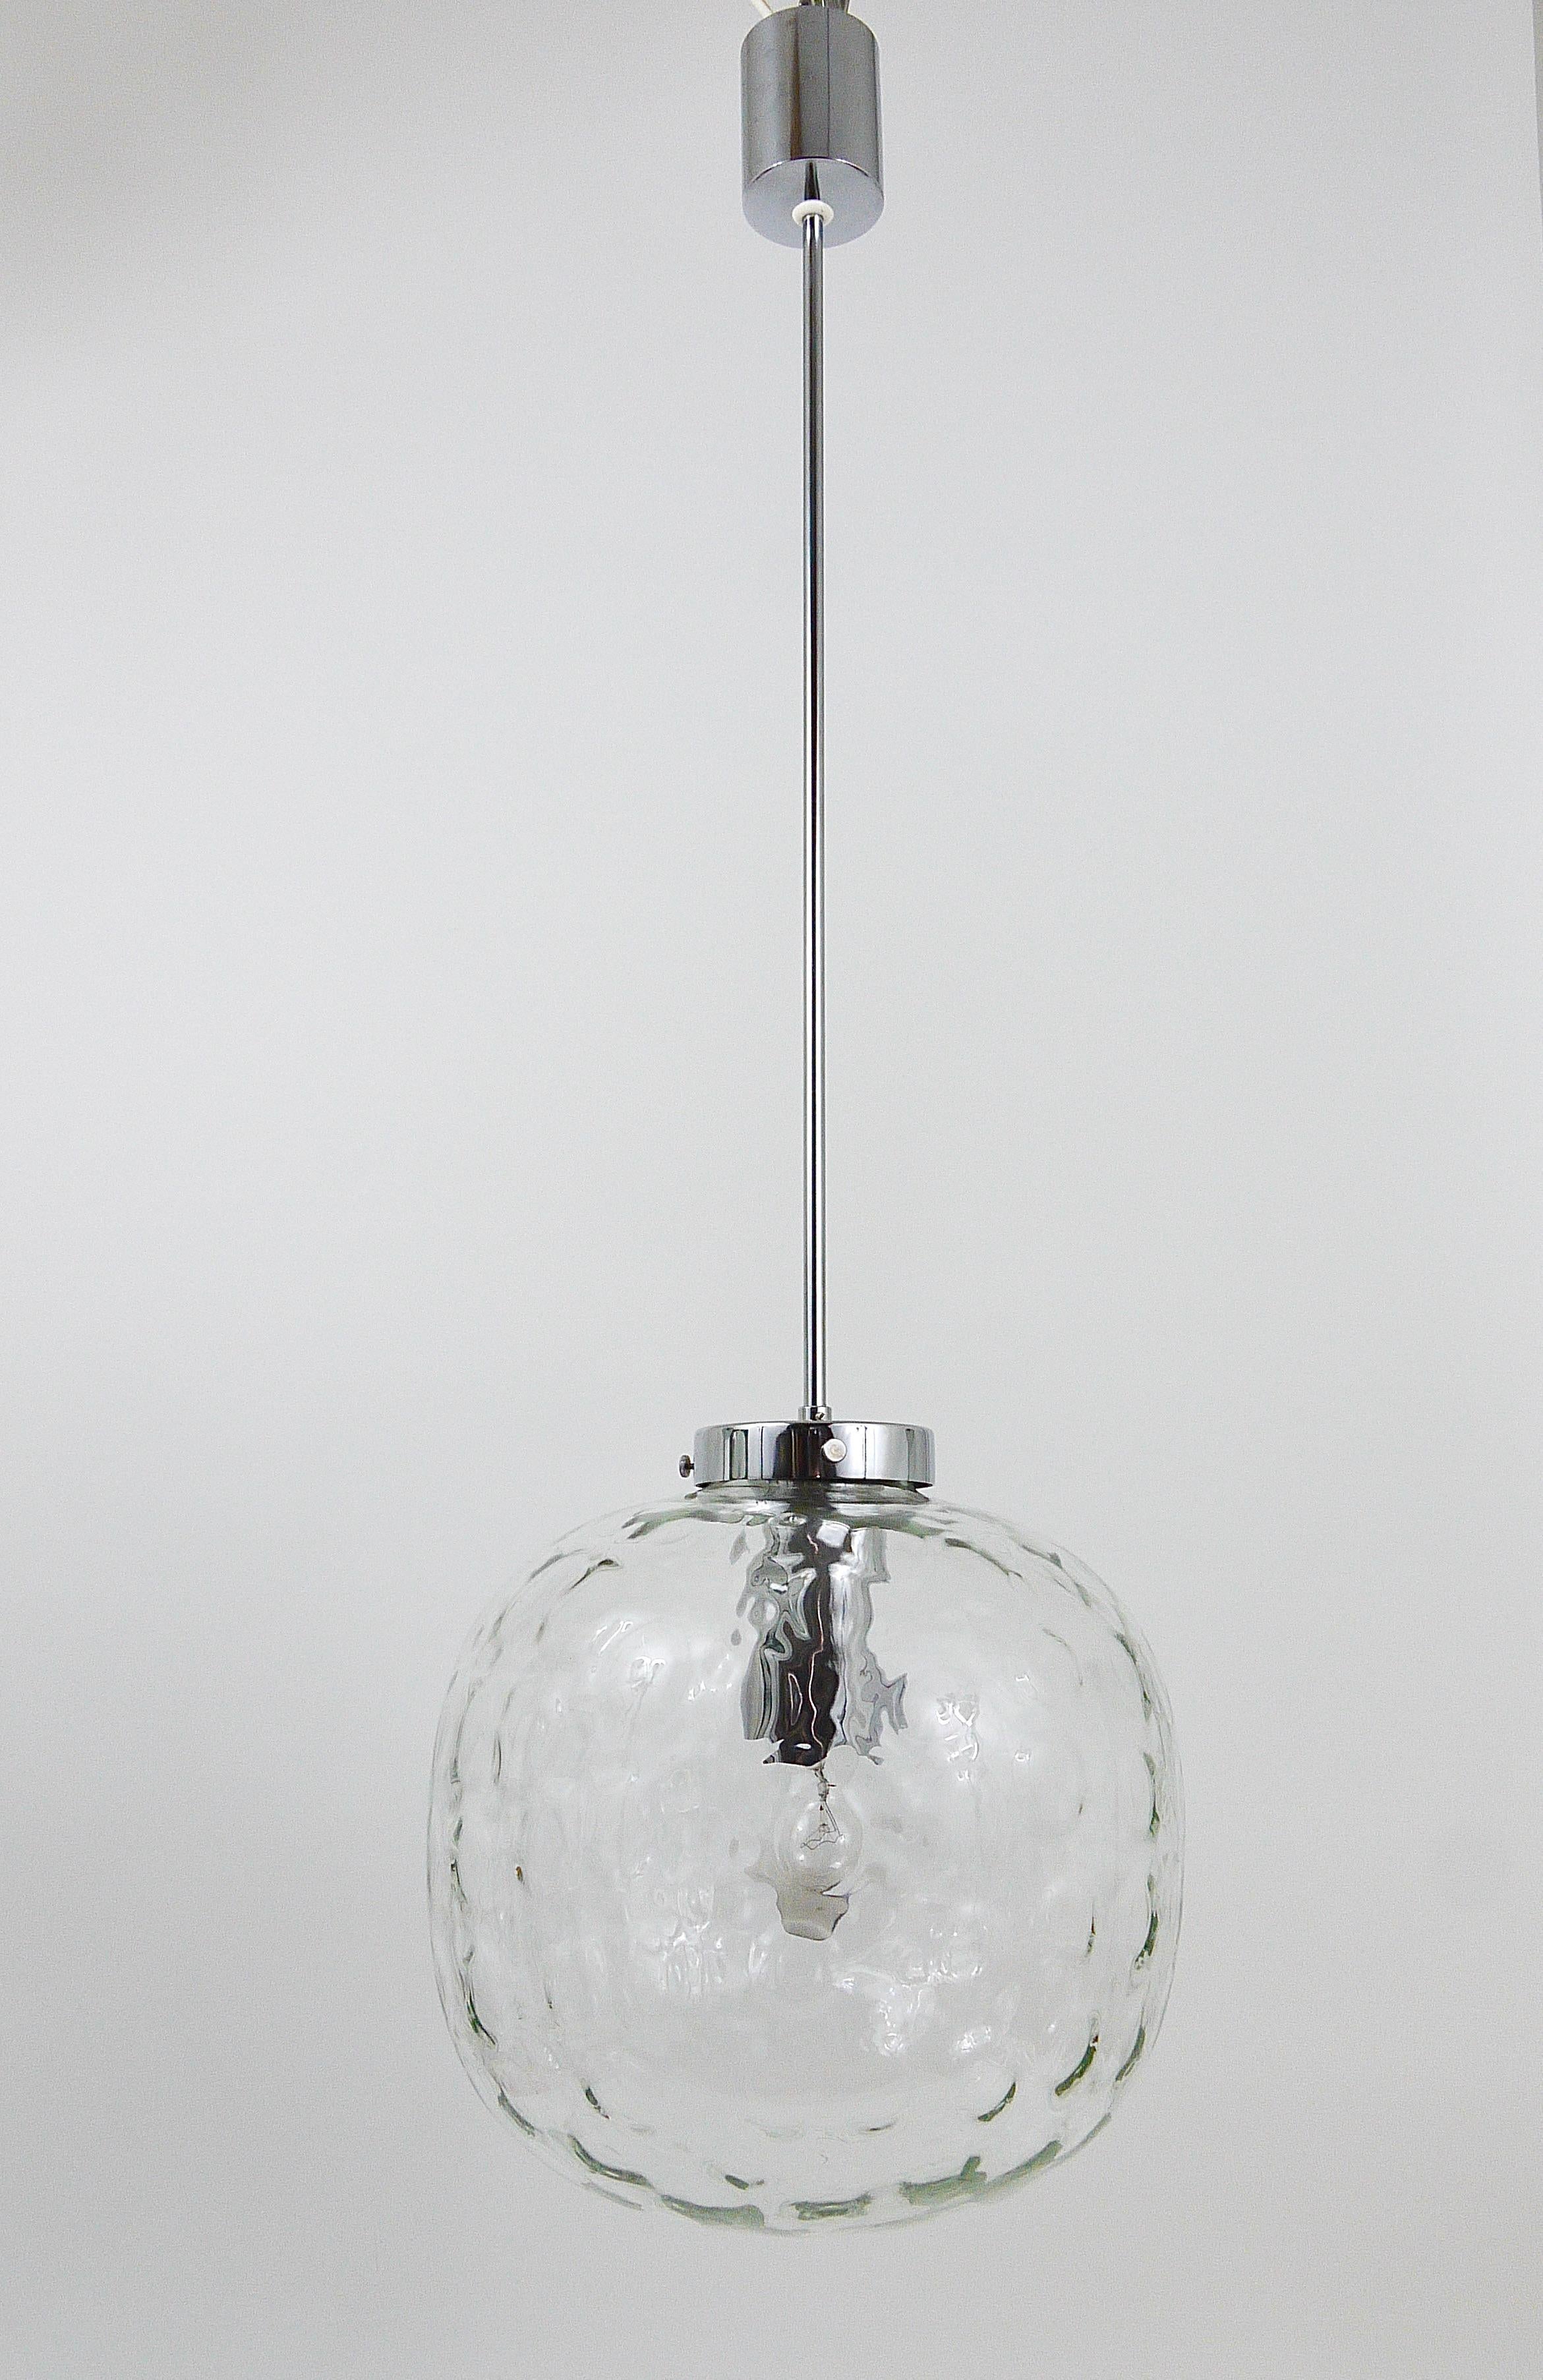 Large Bubble Melting Glass and Chrome Globe Pendant Lamp, Germany, 1970s For Sale 7